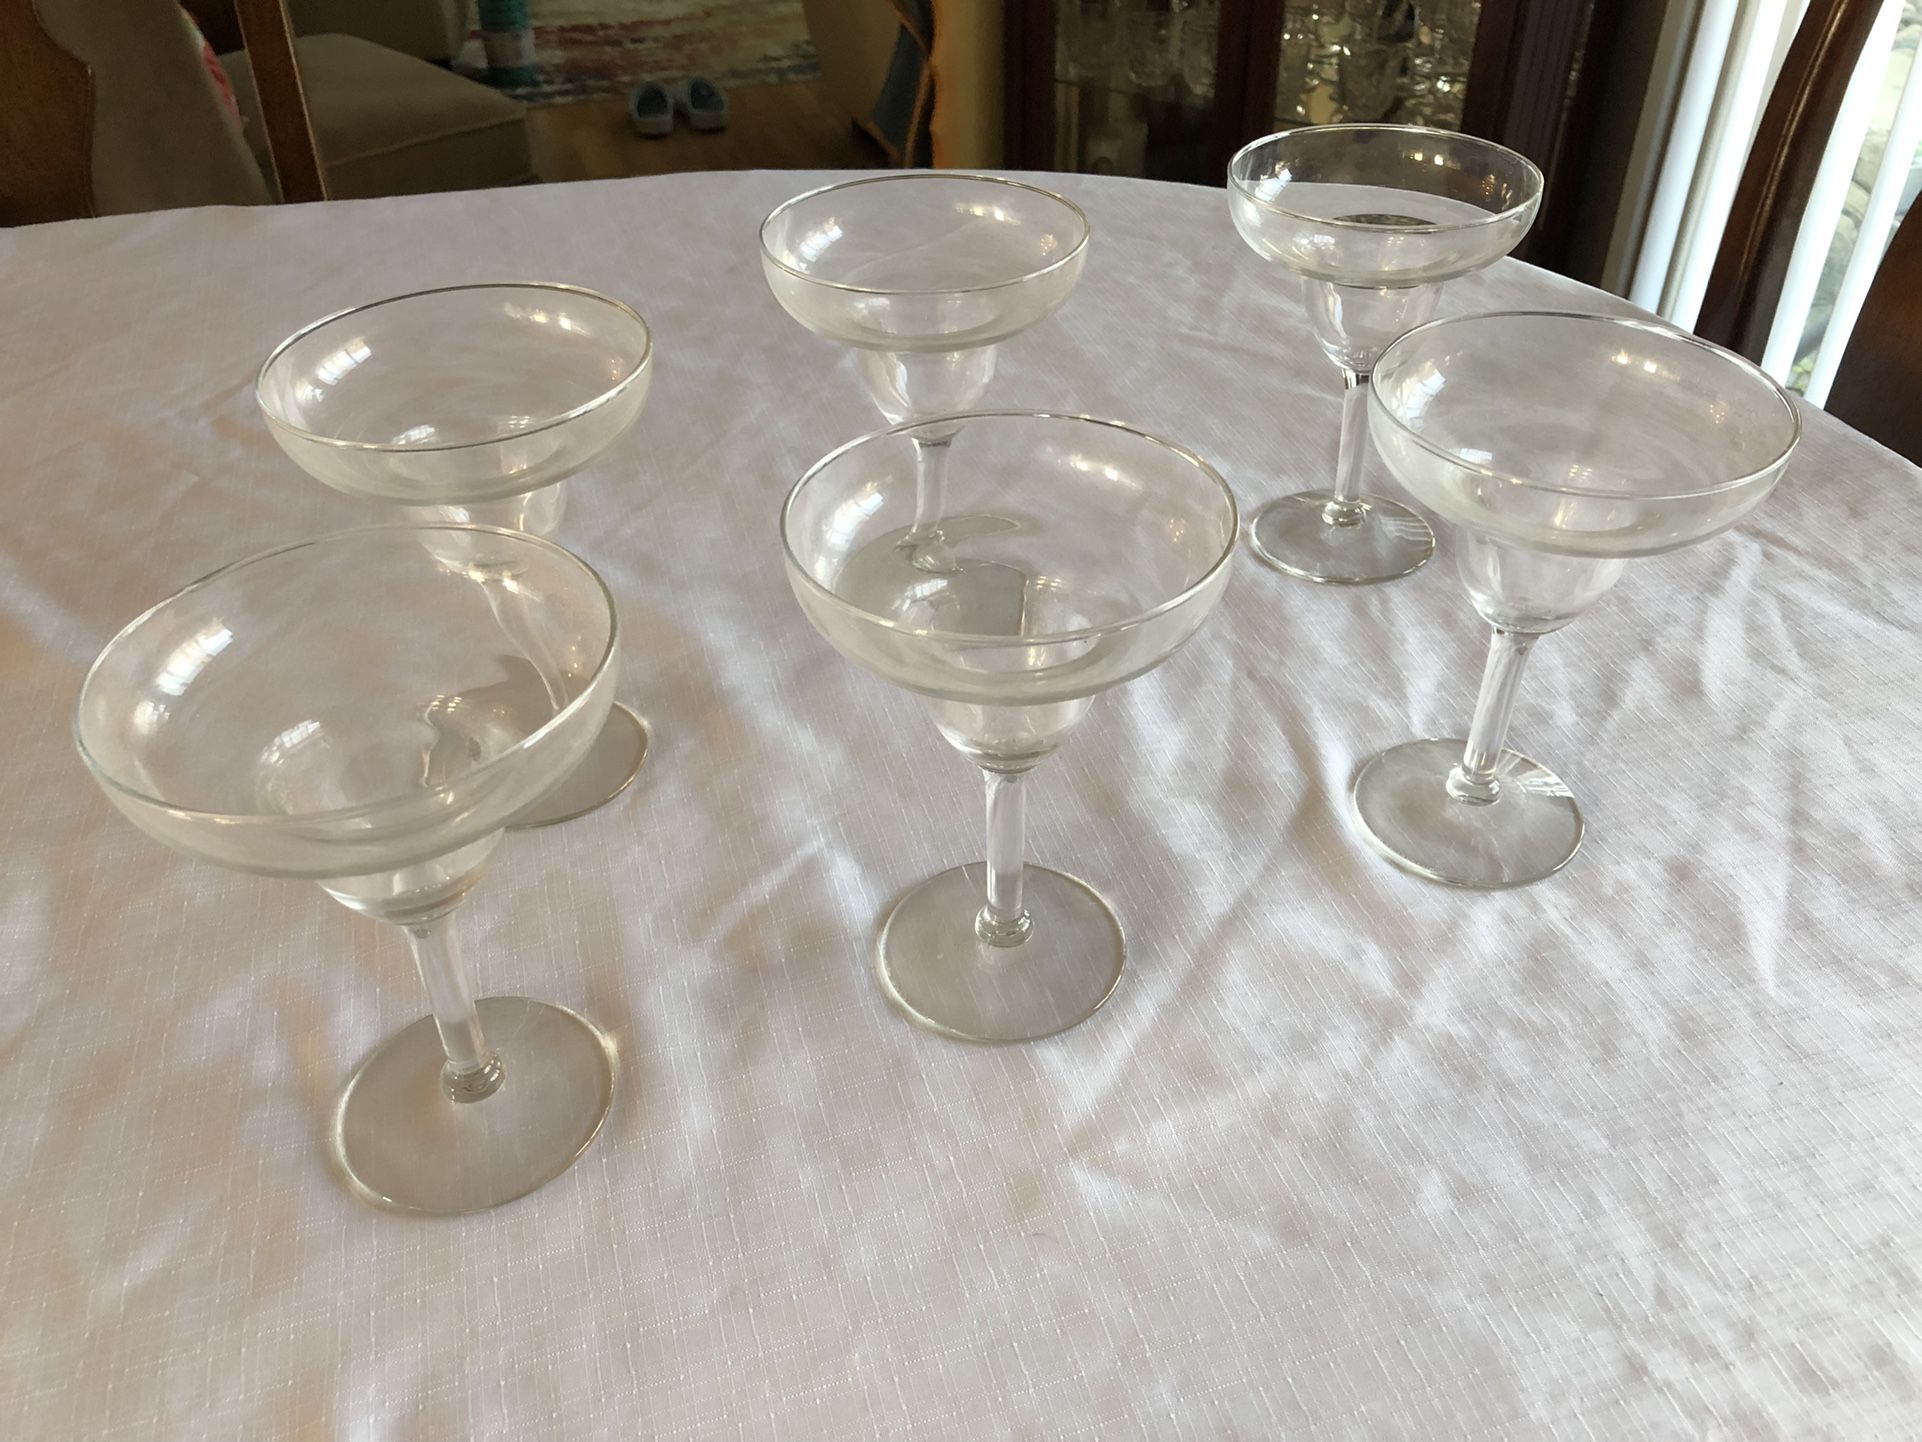 Crystal Coupe Cocktail Glasses